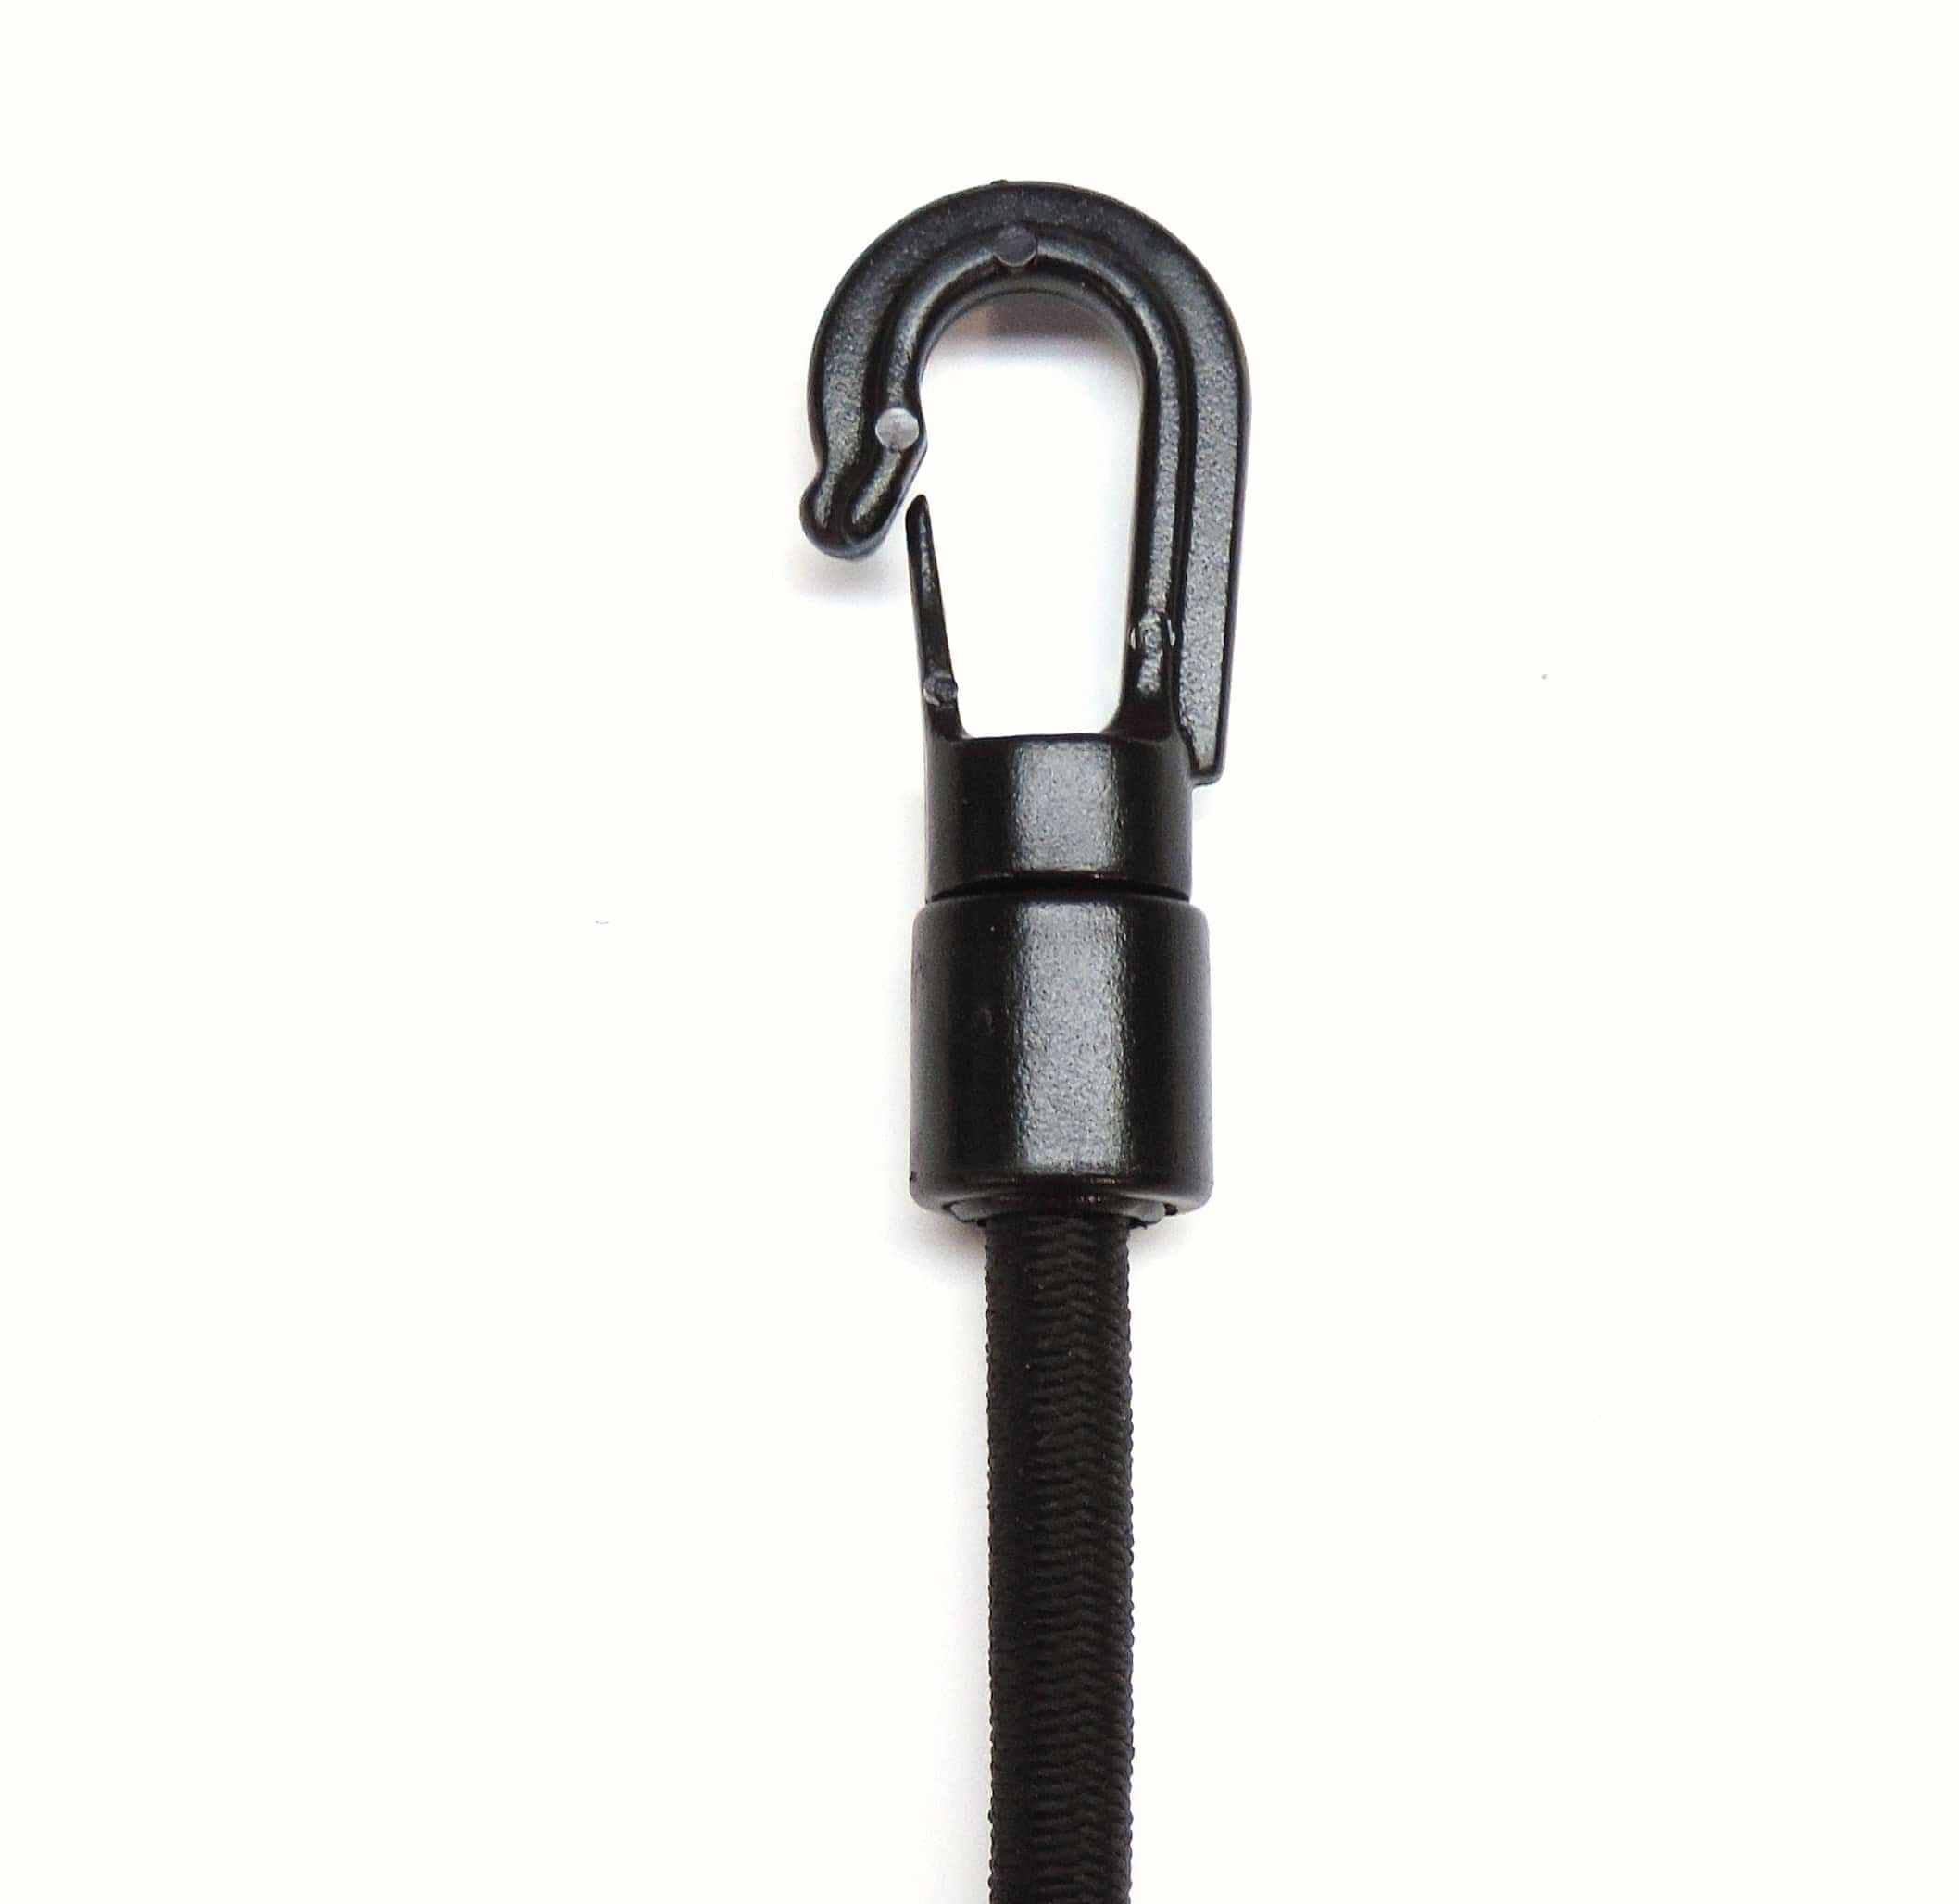 Bungee Cord Hook Pack Small- for 1/4 inch and 3/16 inch Bungee